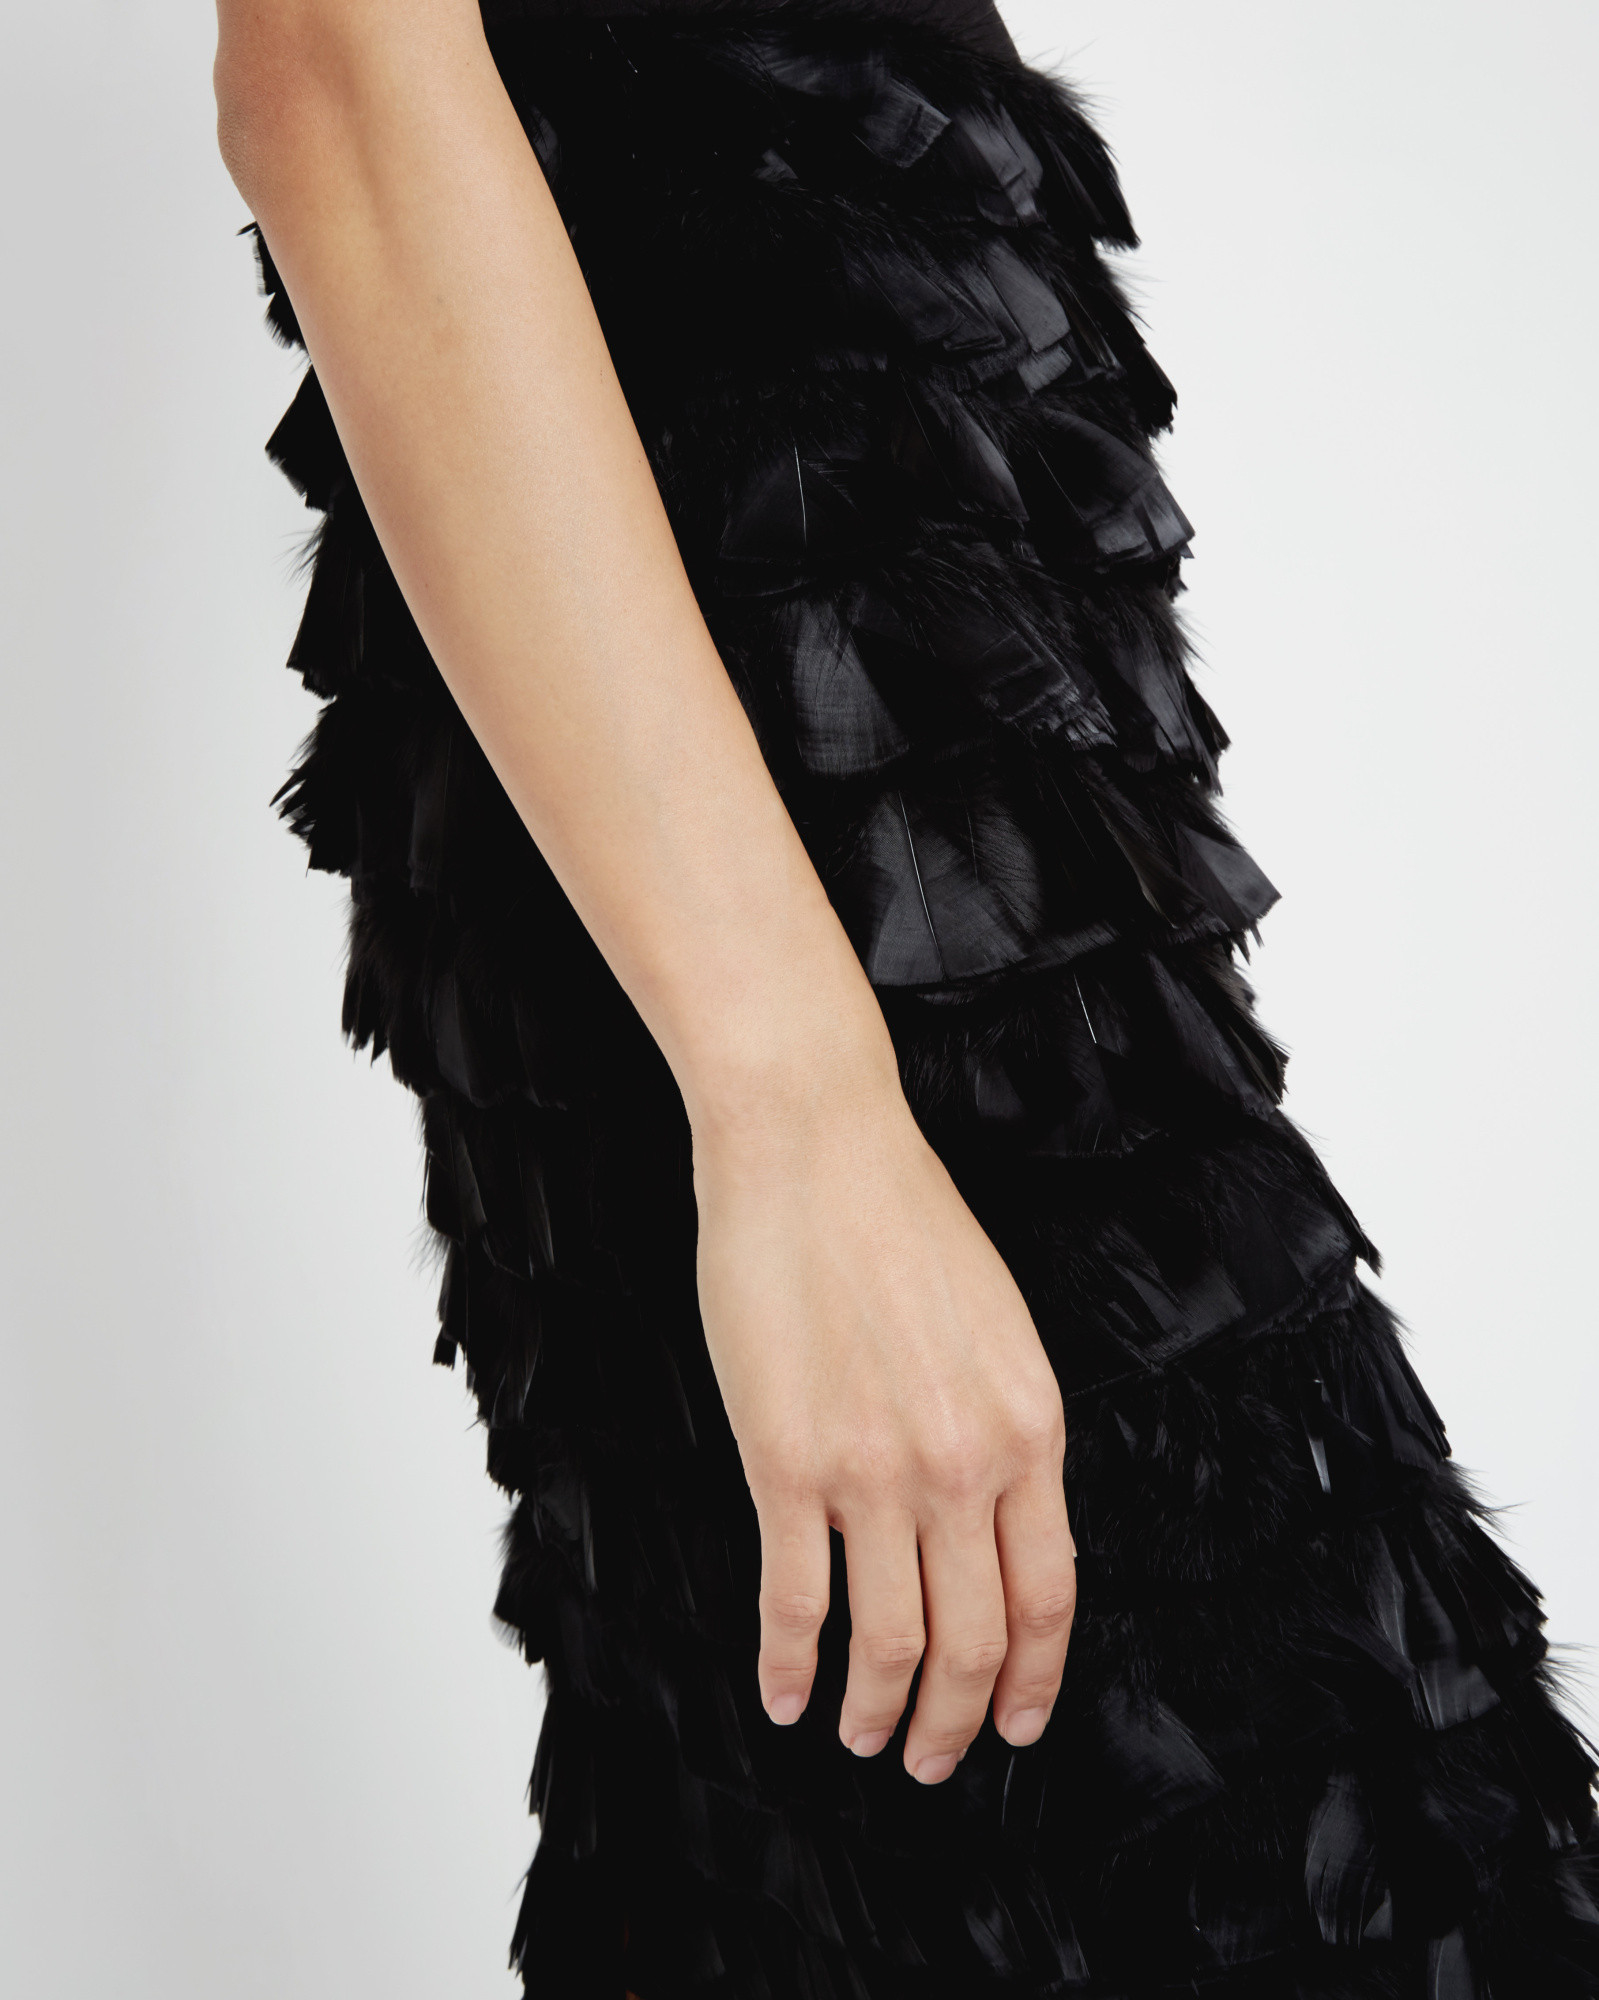 ted baker feather dress